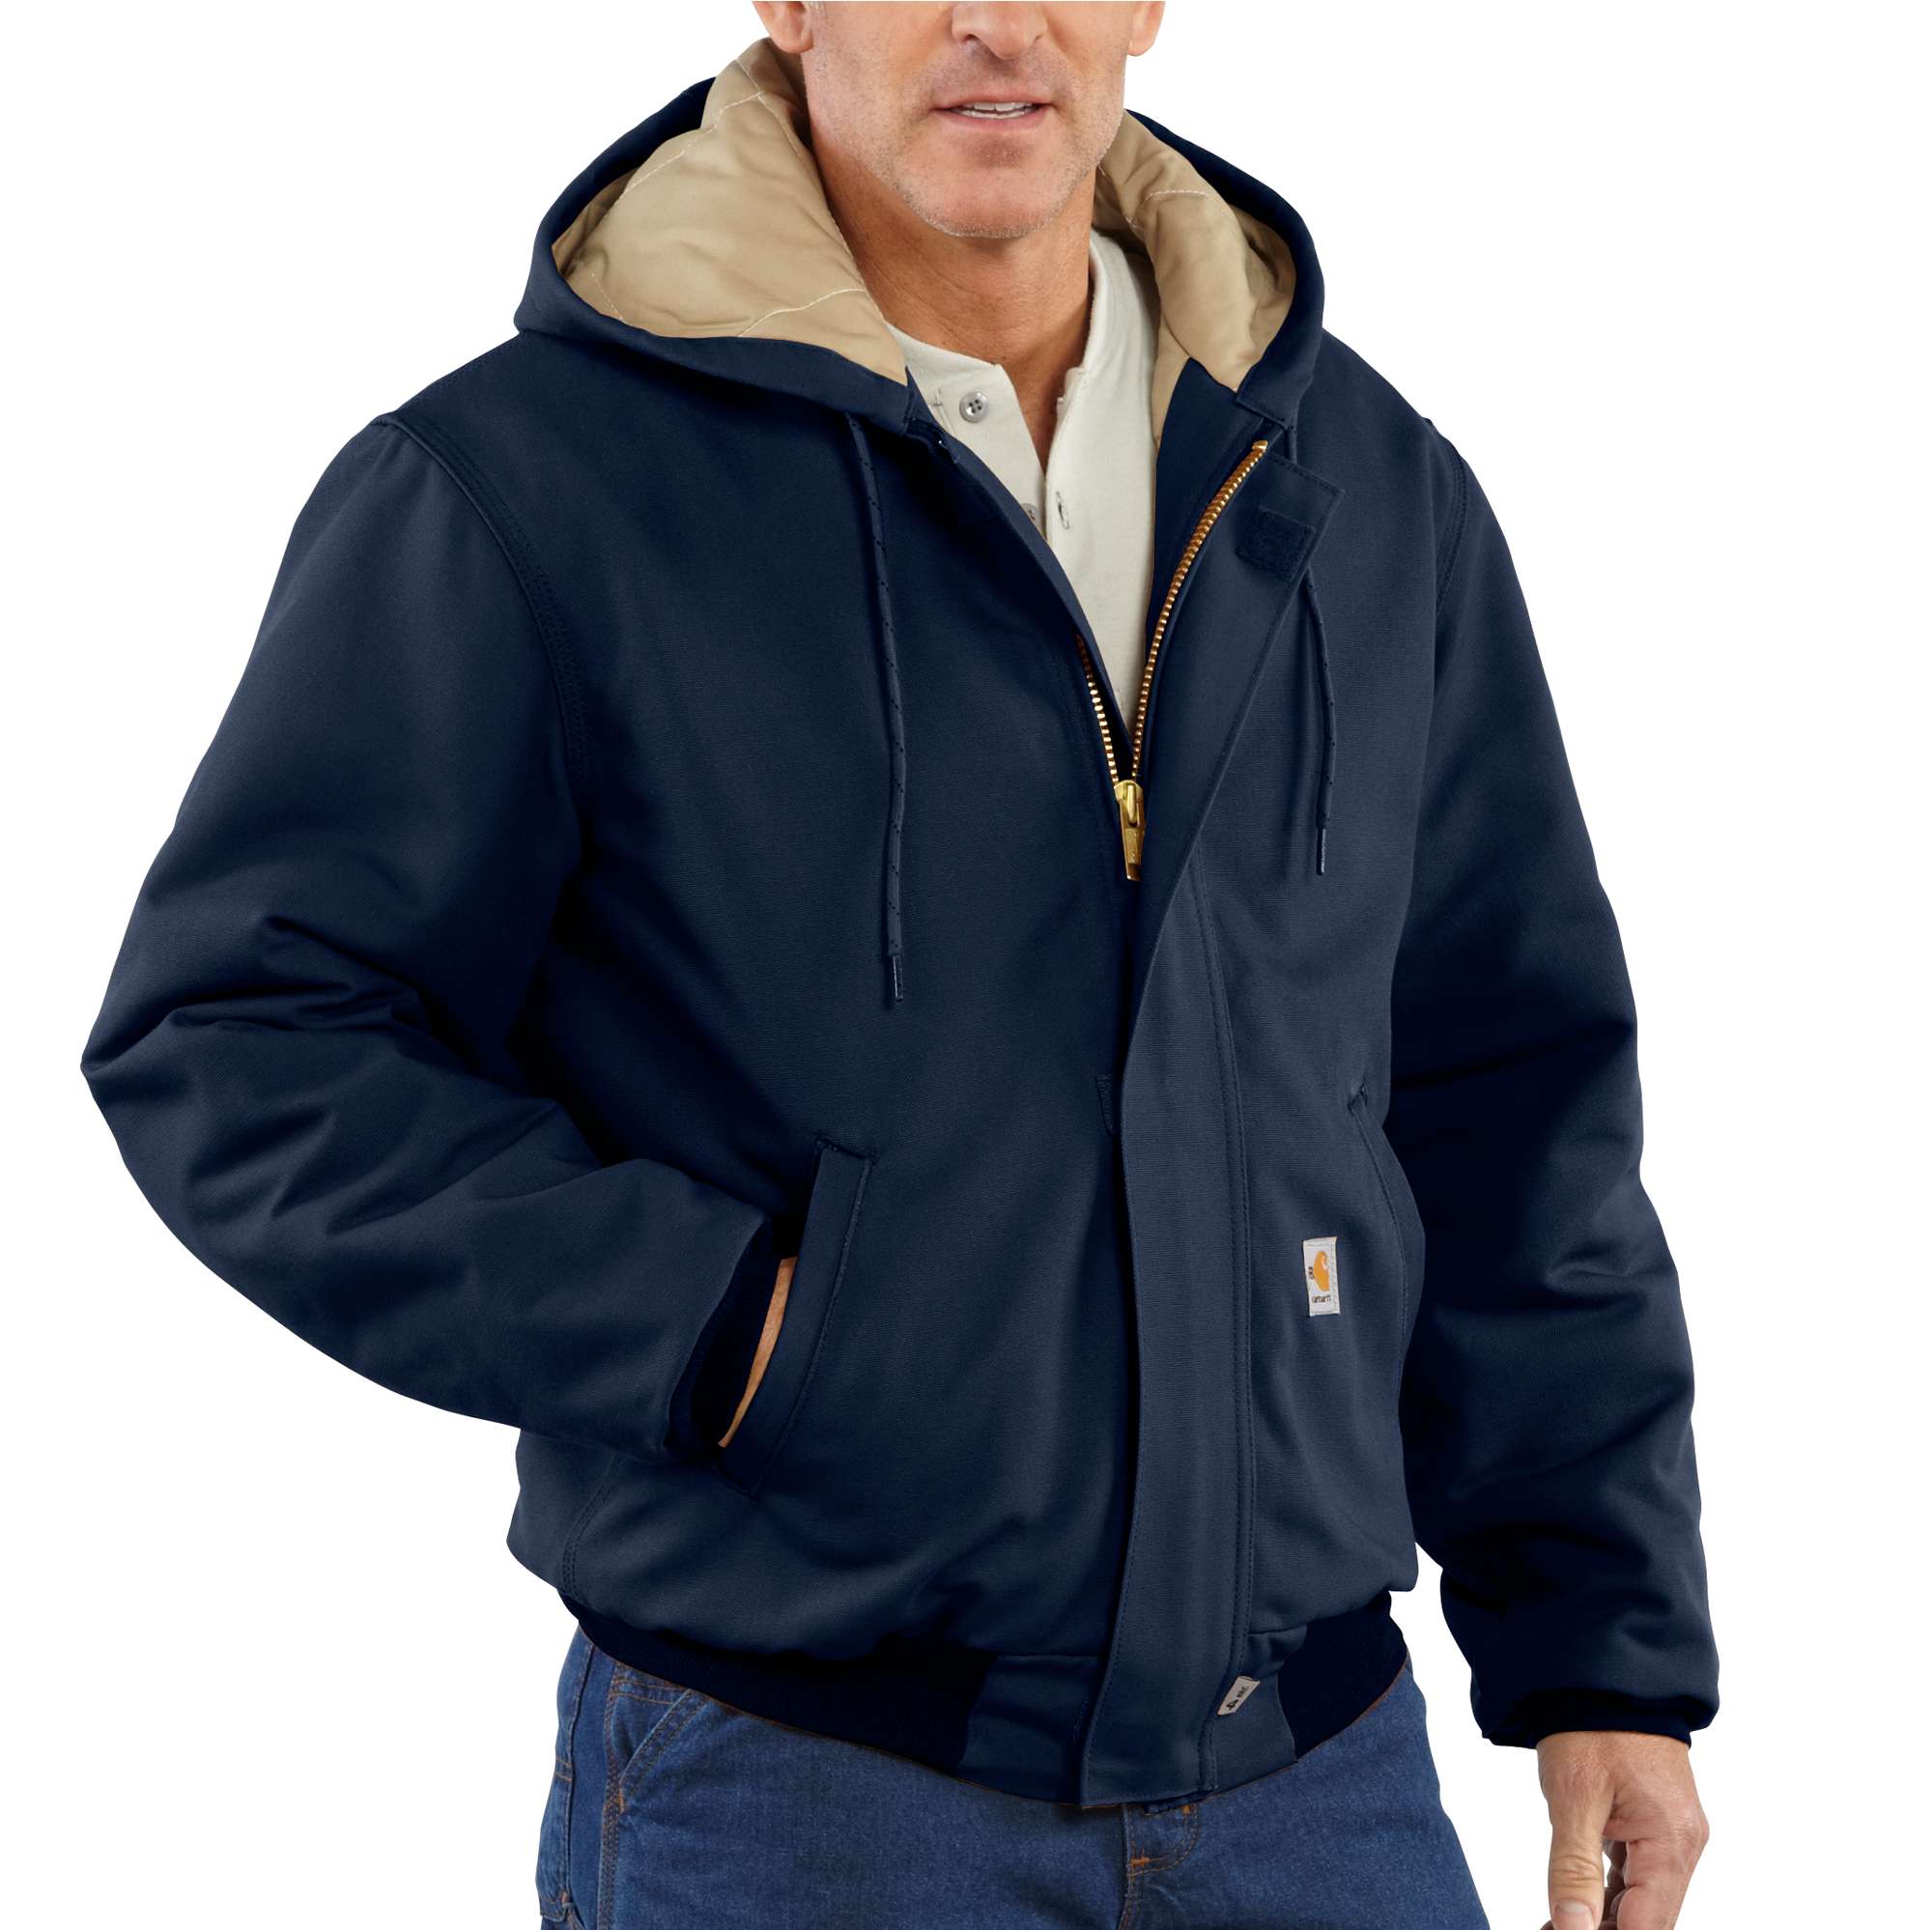 Carhartt Flame-resistant Duck Active Jac/quilt Lined